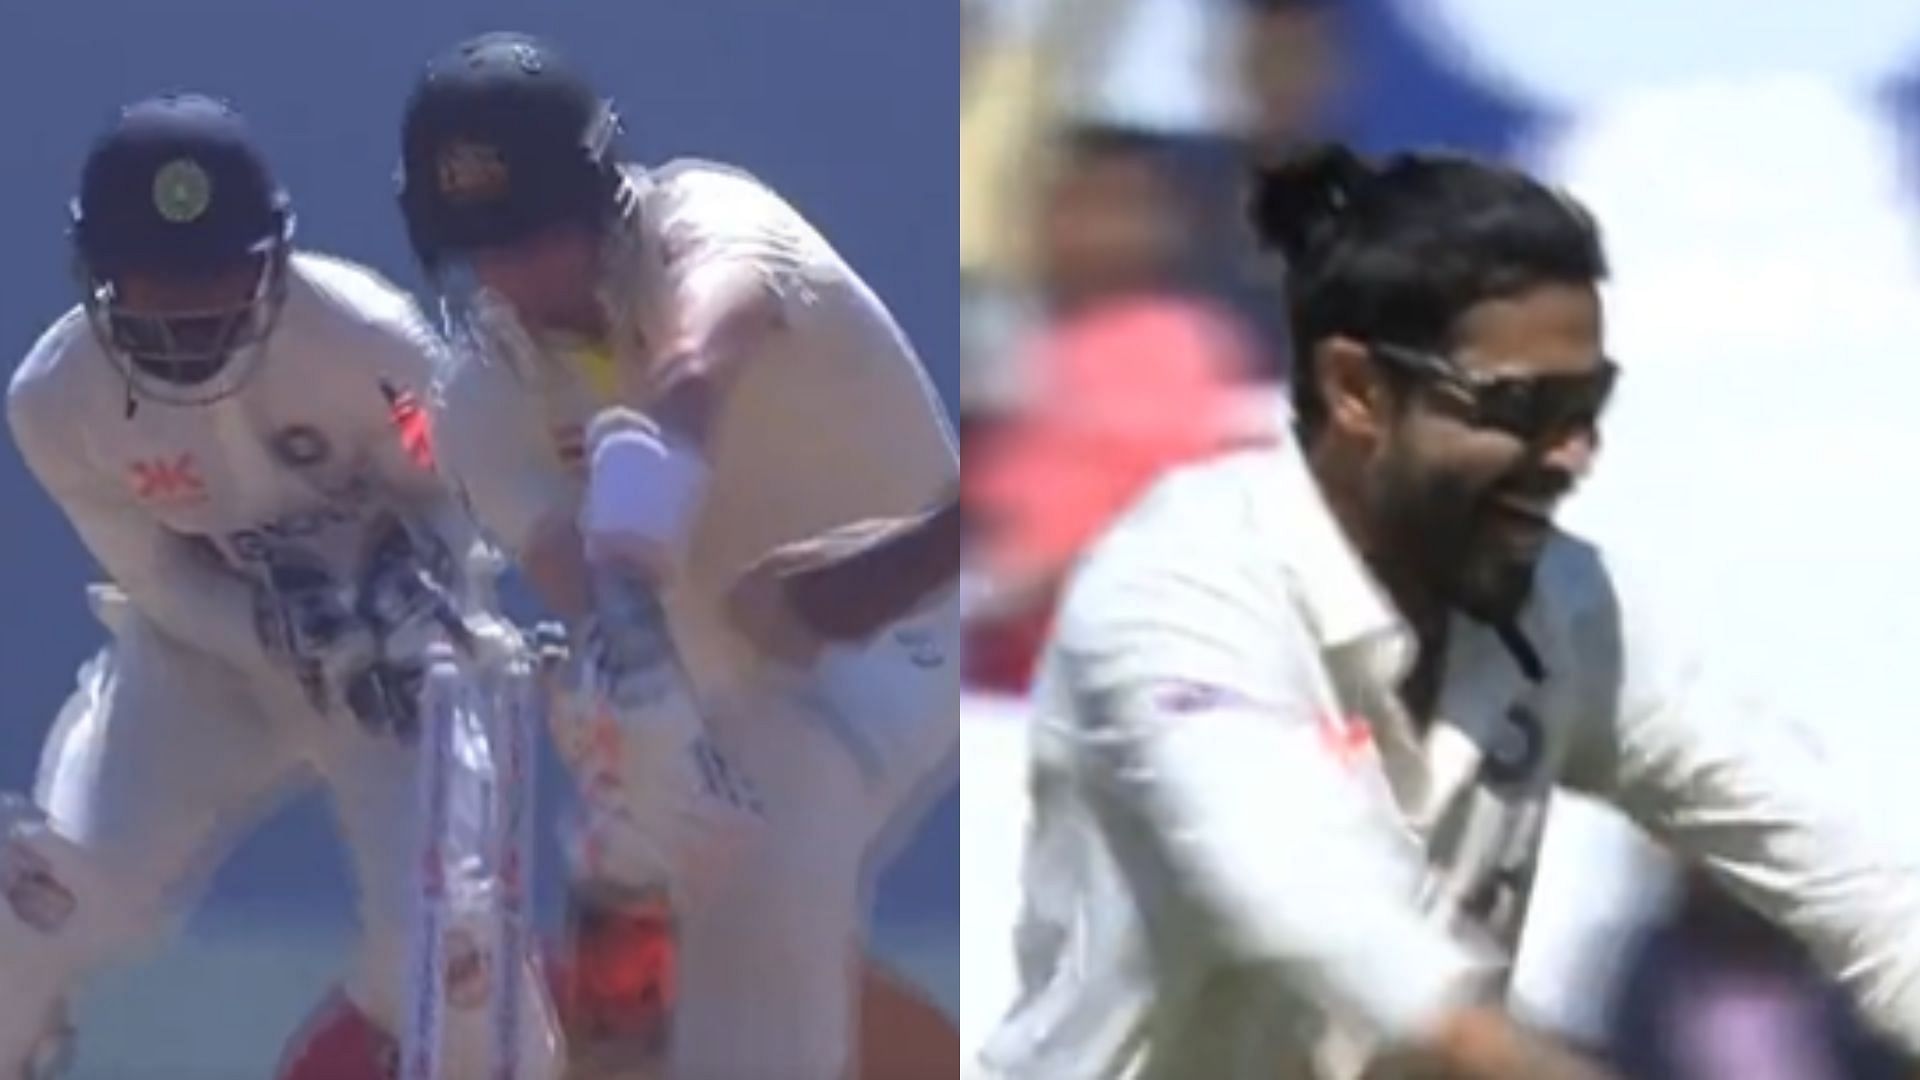 [WATCH] Ravindra Jadeja outfoxes Steve Smith with an arm ball to dismiss him for 37 on Day 1 